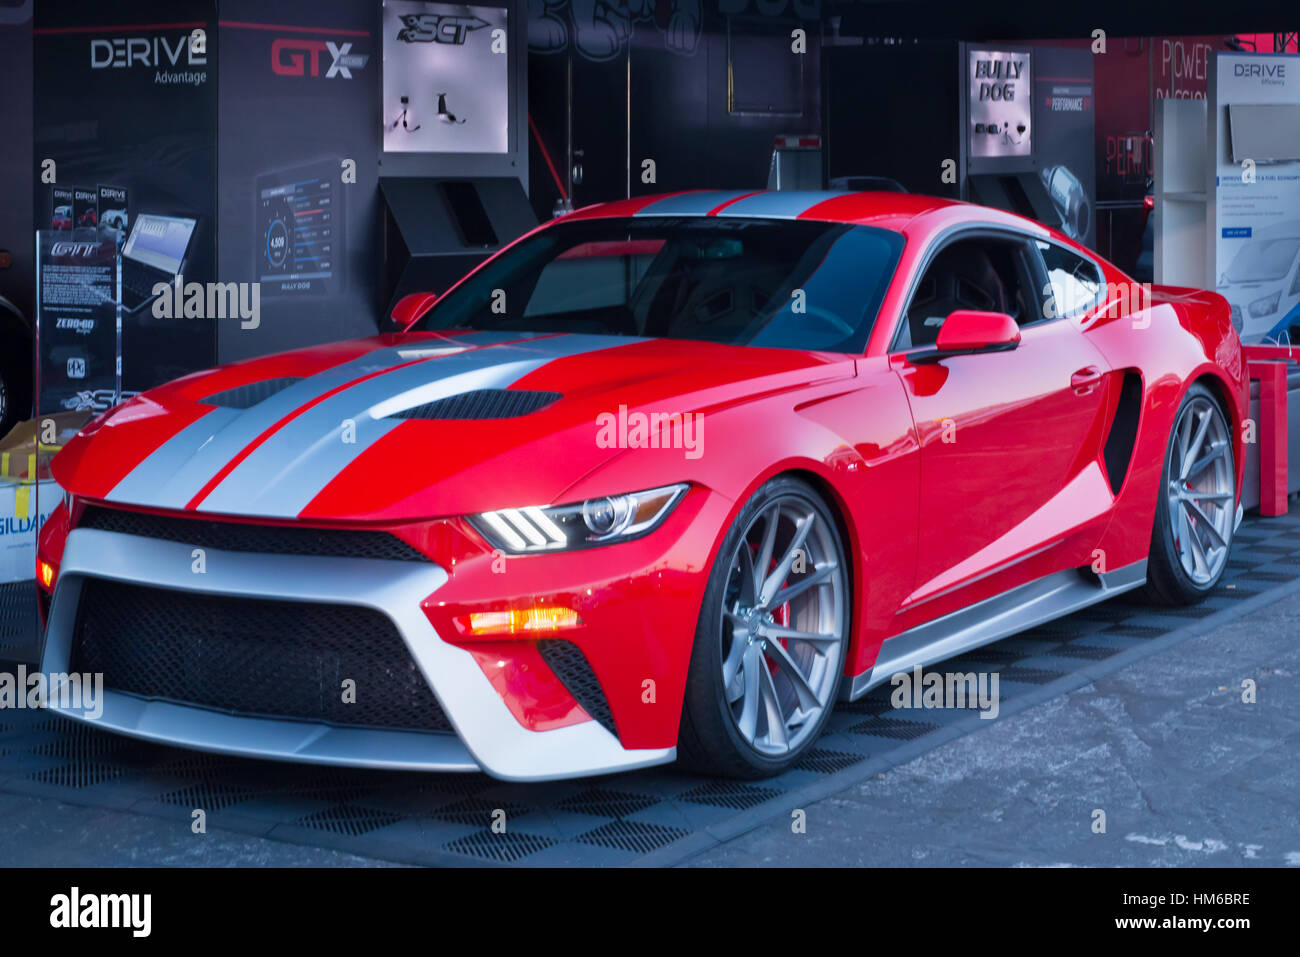 Custom Ford Mustang, tribute to the Ford GT, at SEMA. Stock Photo